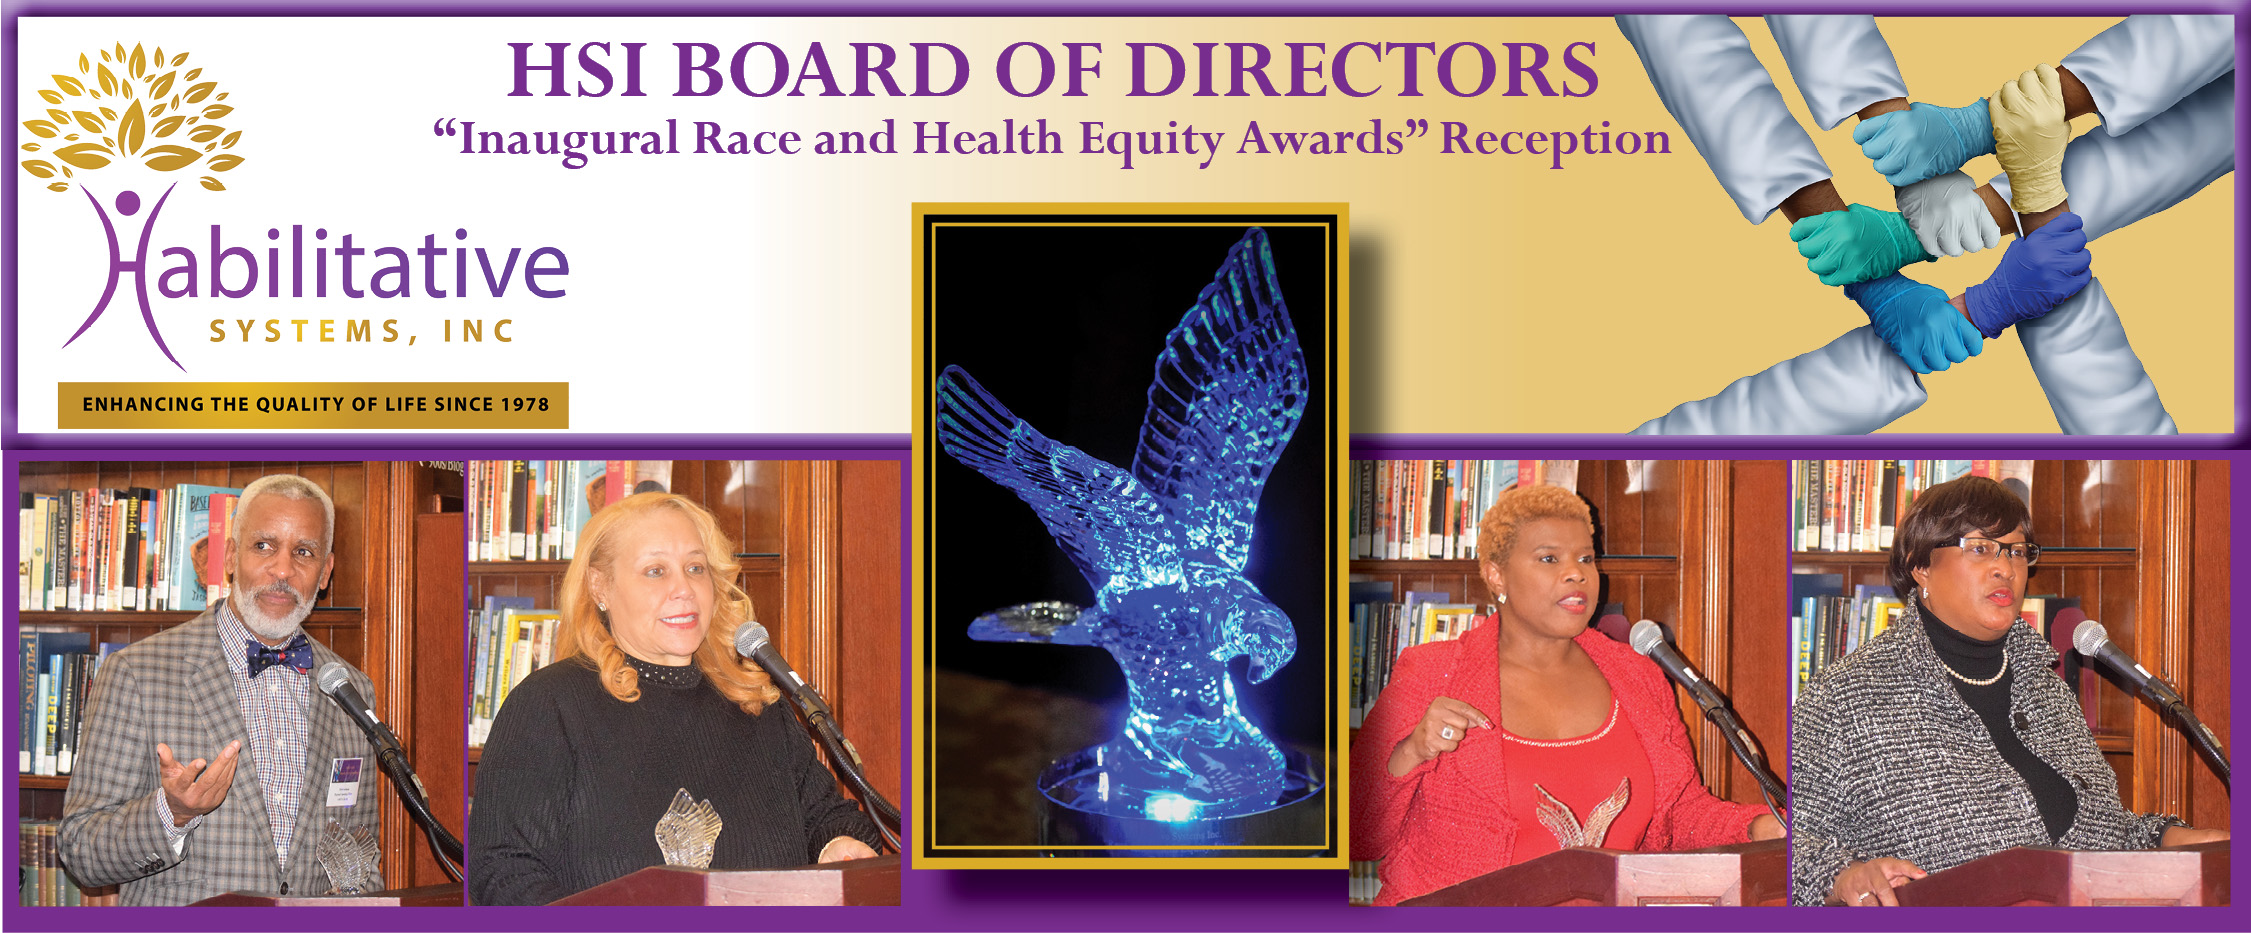 Race and Health Equity Awards Reception